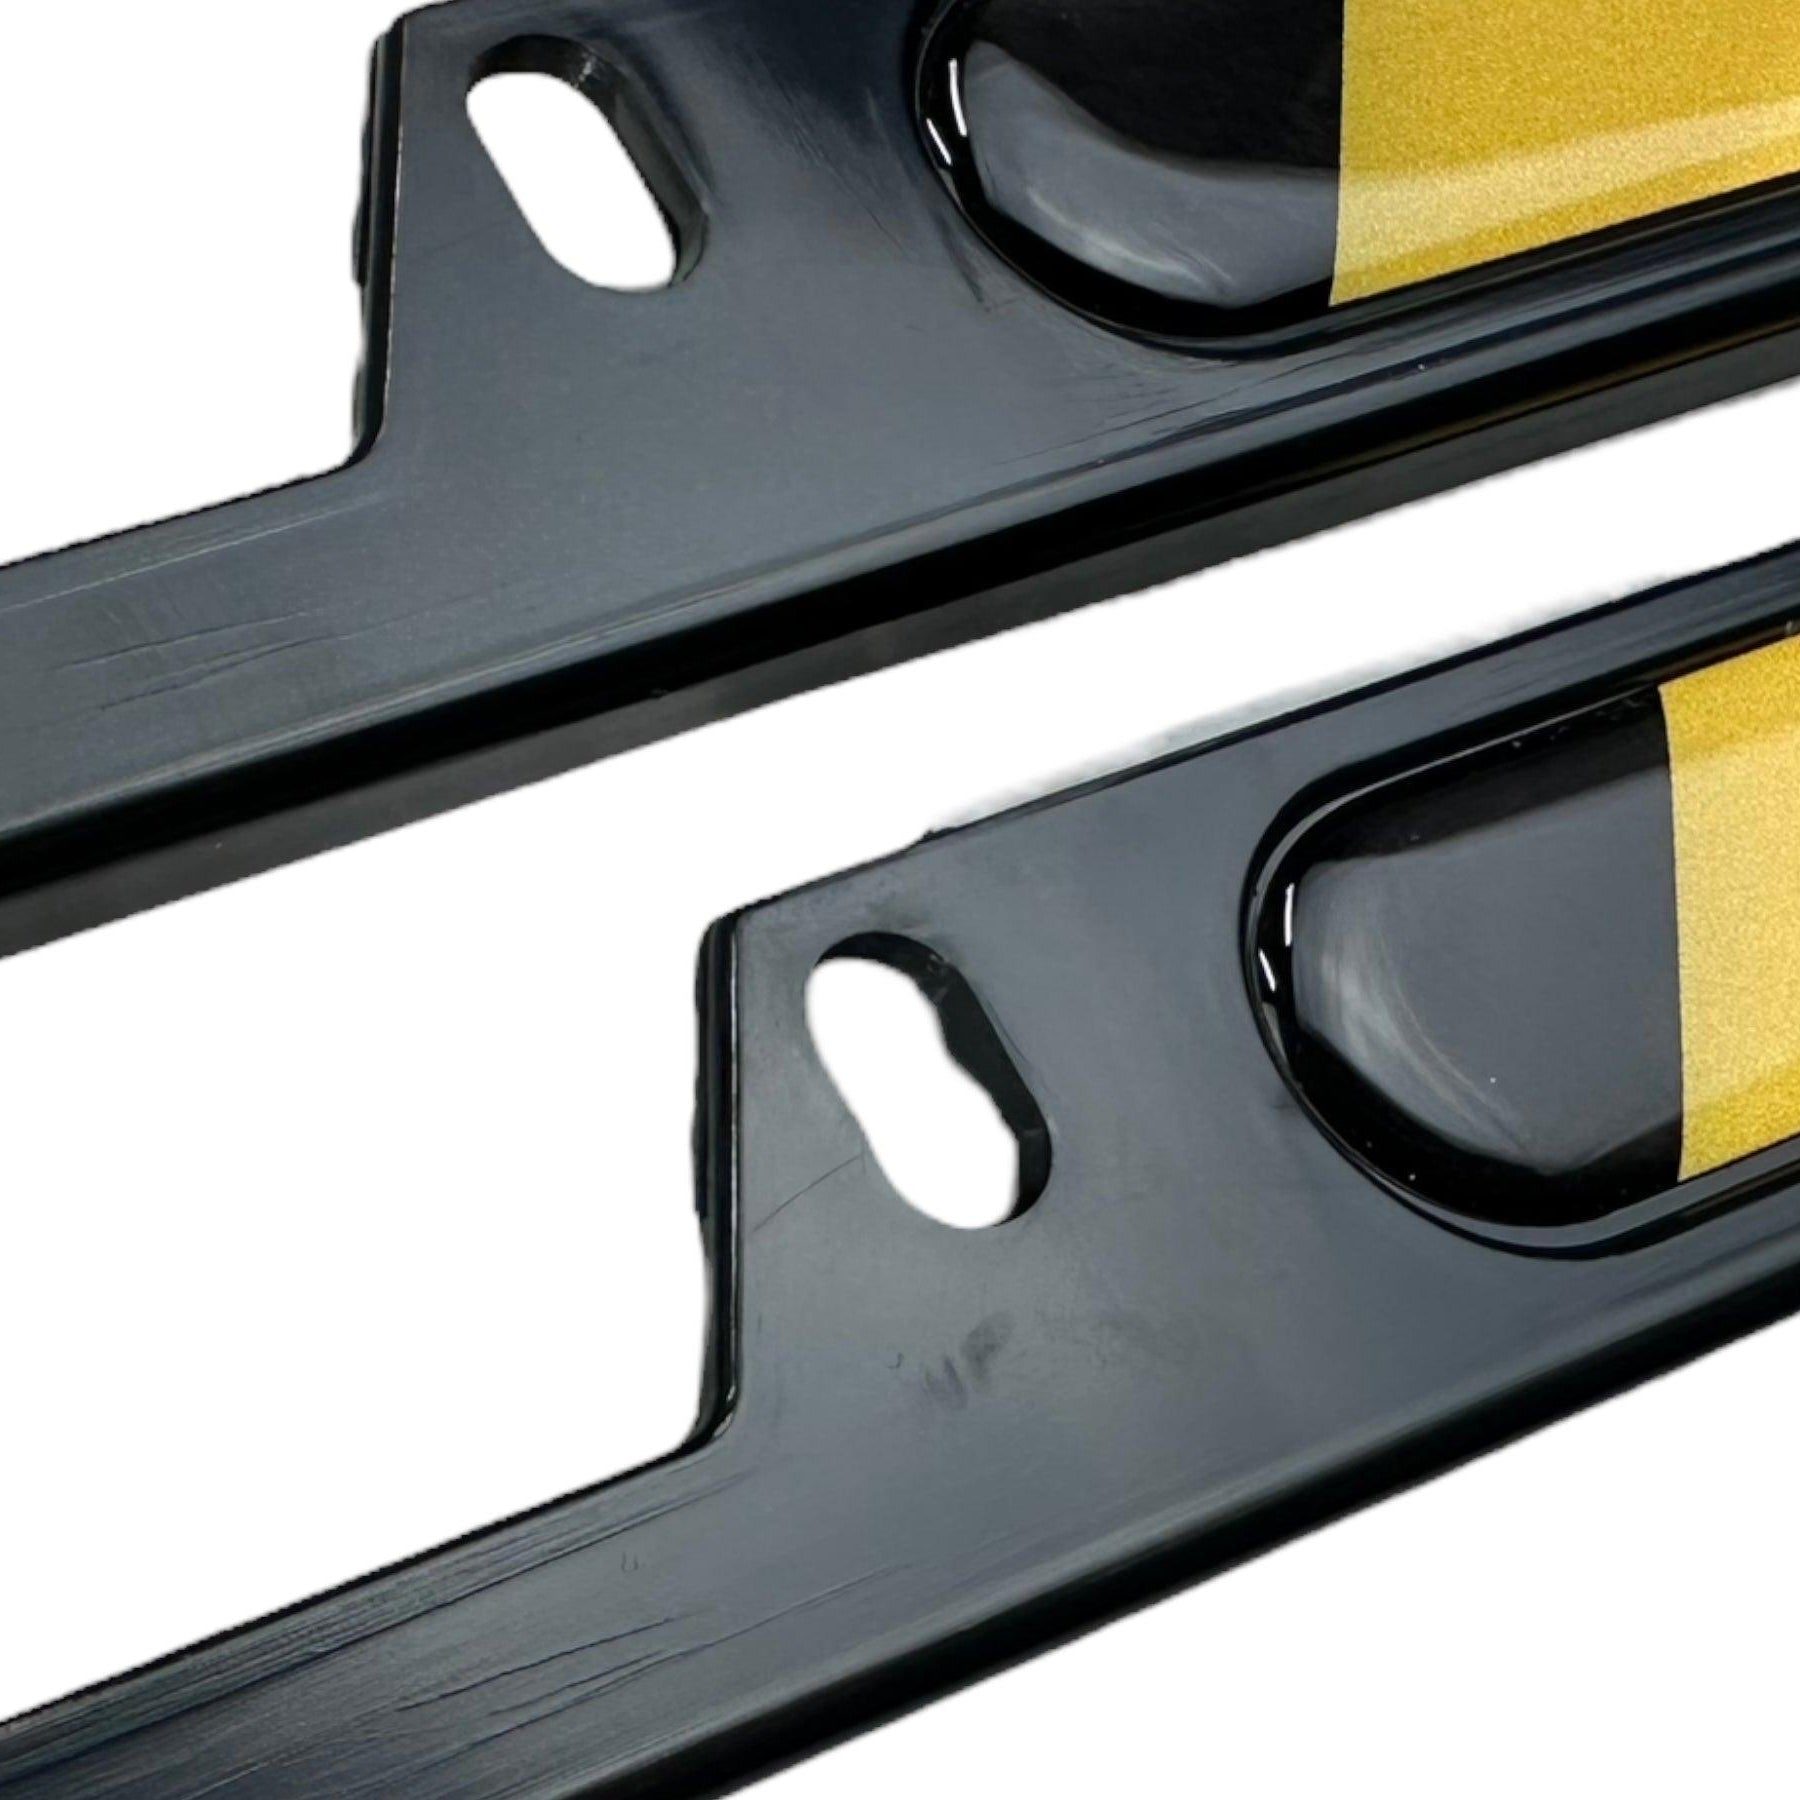 Autowin Number Plate Holder USA Standard Size Retro Yellow